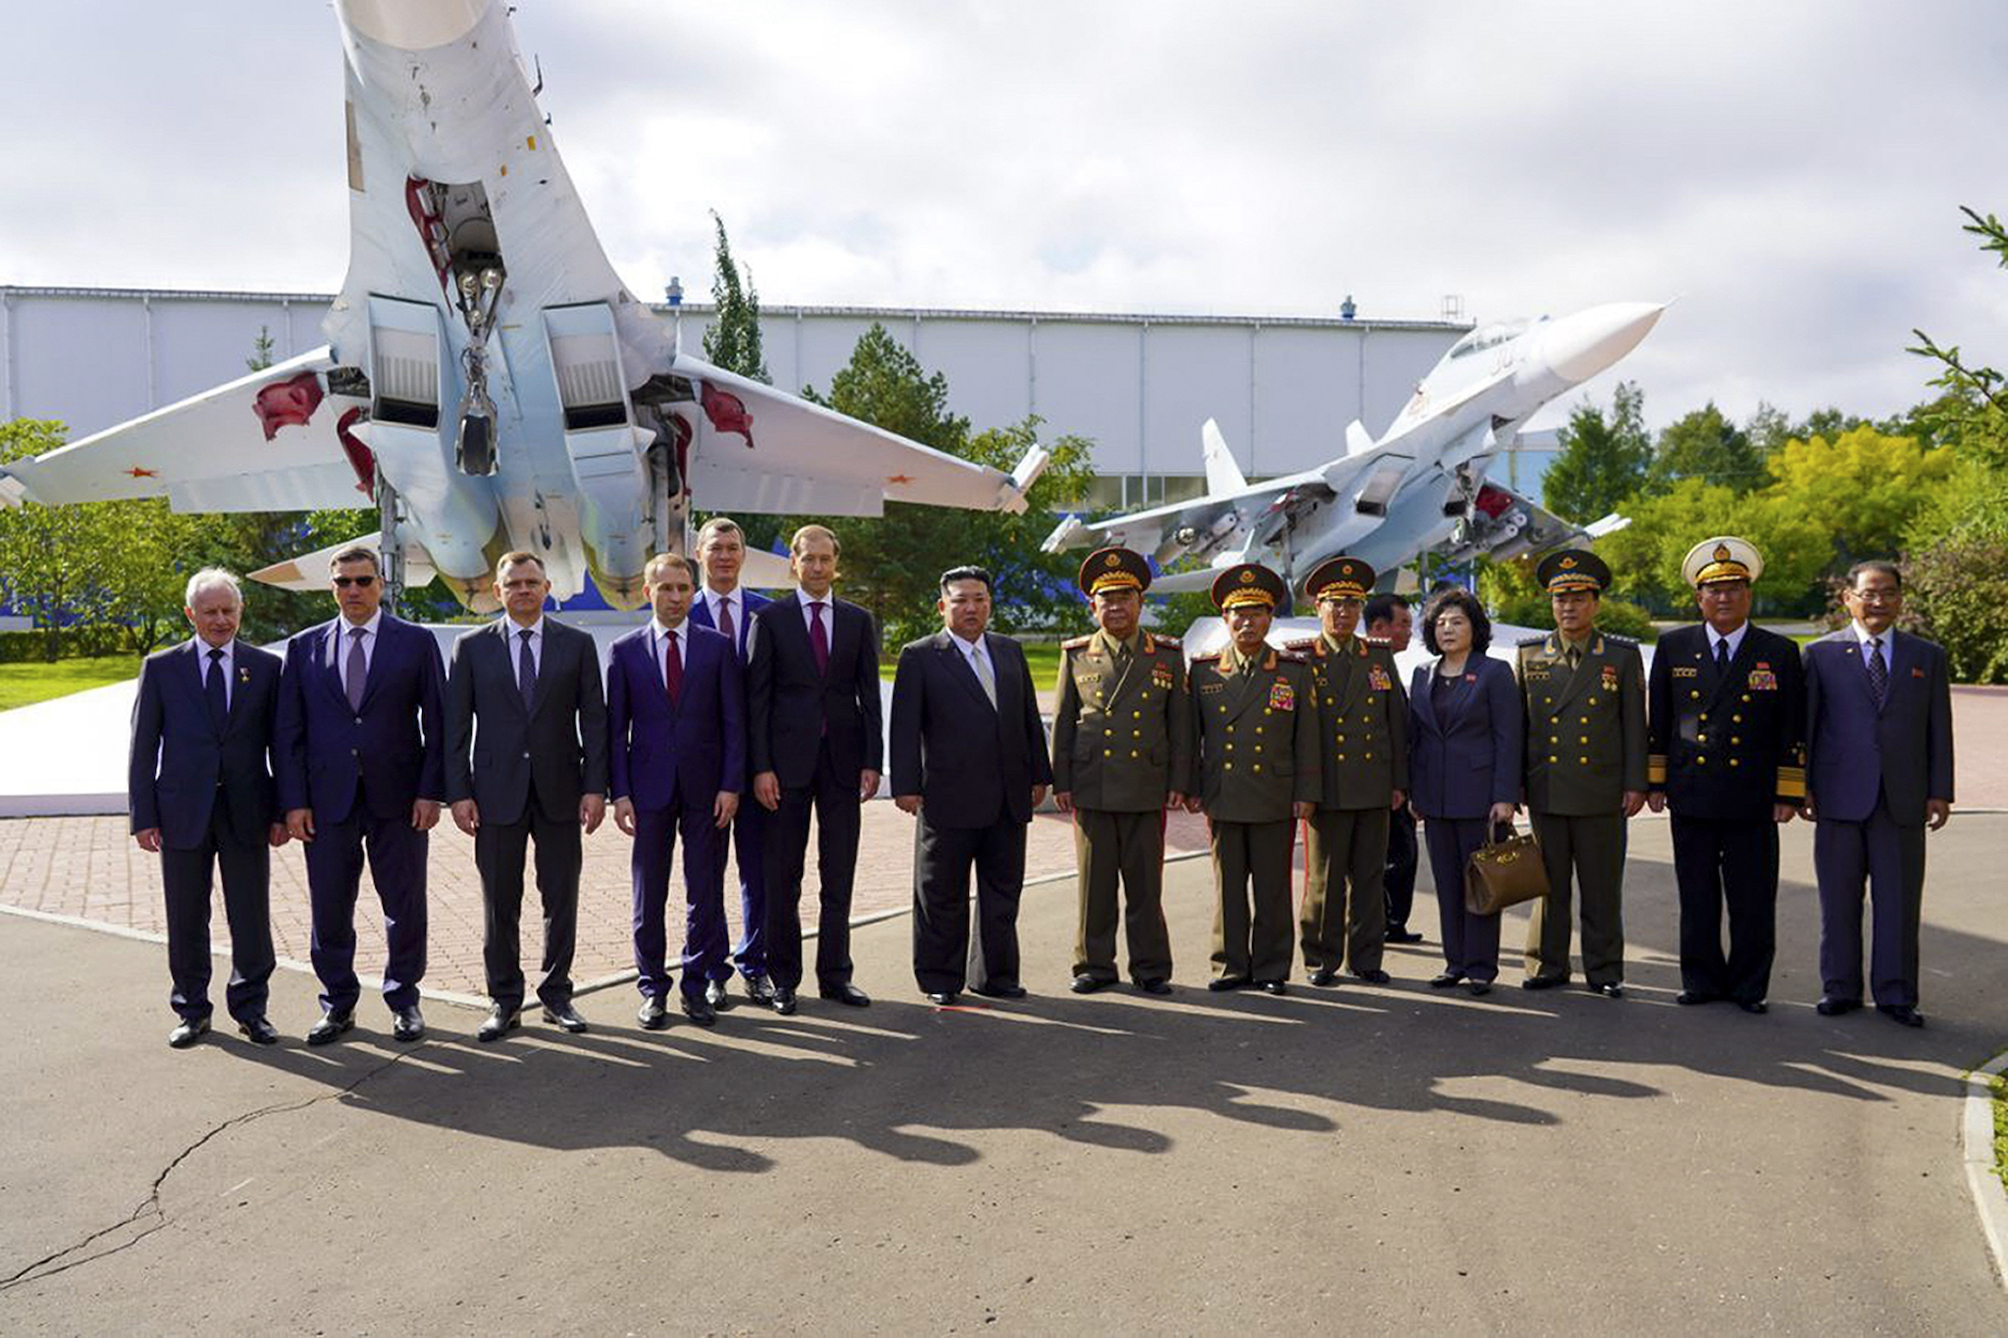 DPRK’s Kim Jong Un inspects Su-57 fighter jet during visit to Russia